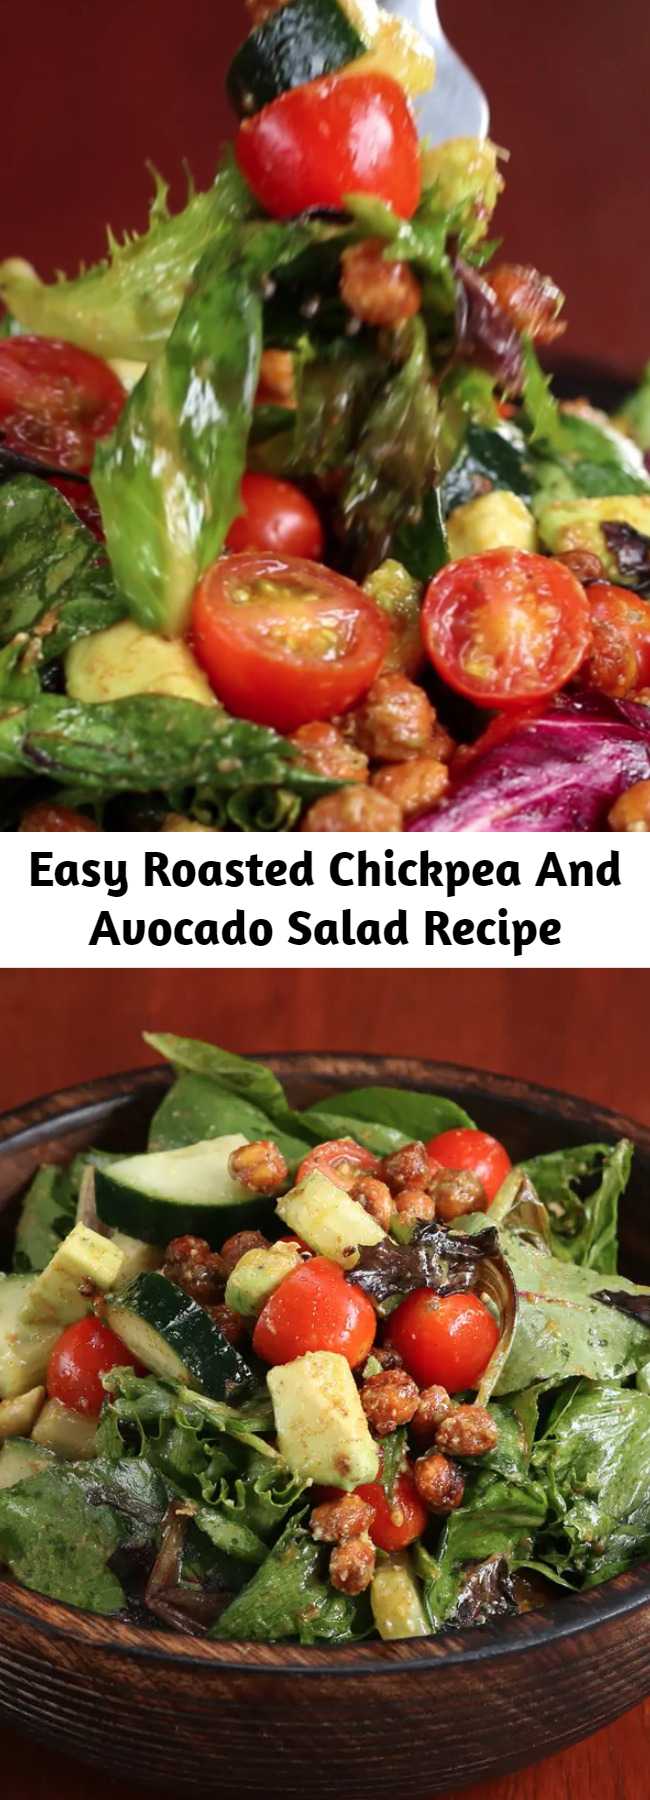 Easy Roasted Chickpea And Avocado Salad Recipe - Enjoy Lunch Even More With This Roasted Chickpea And Avocado Salad.